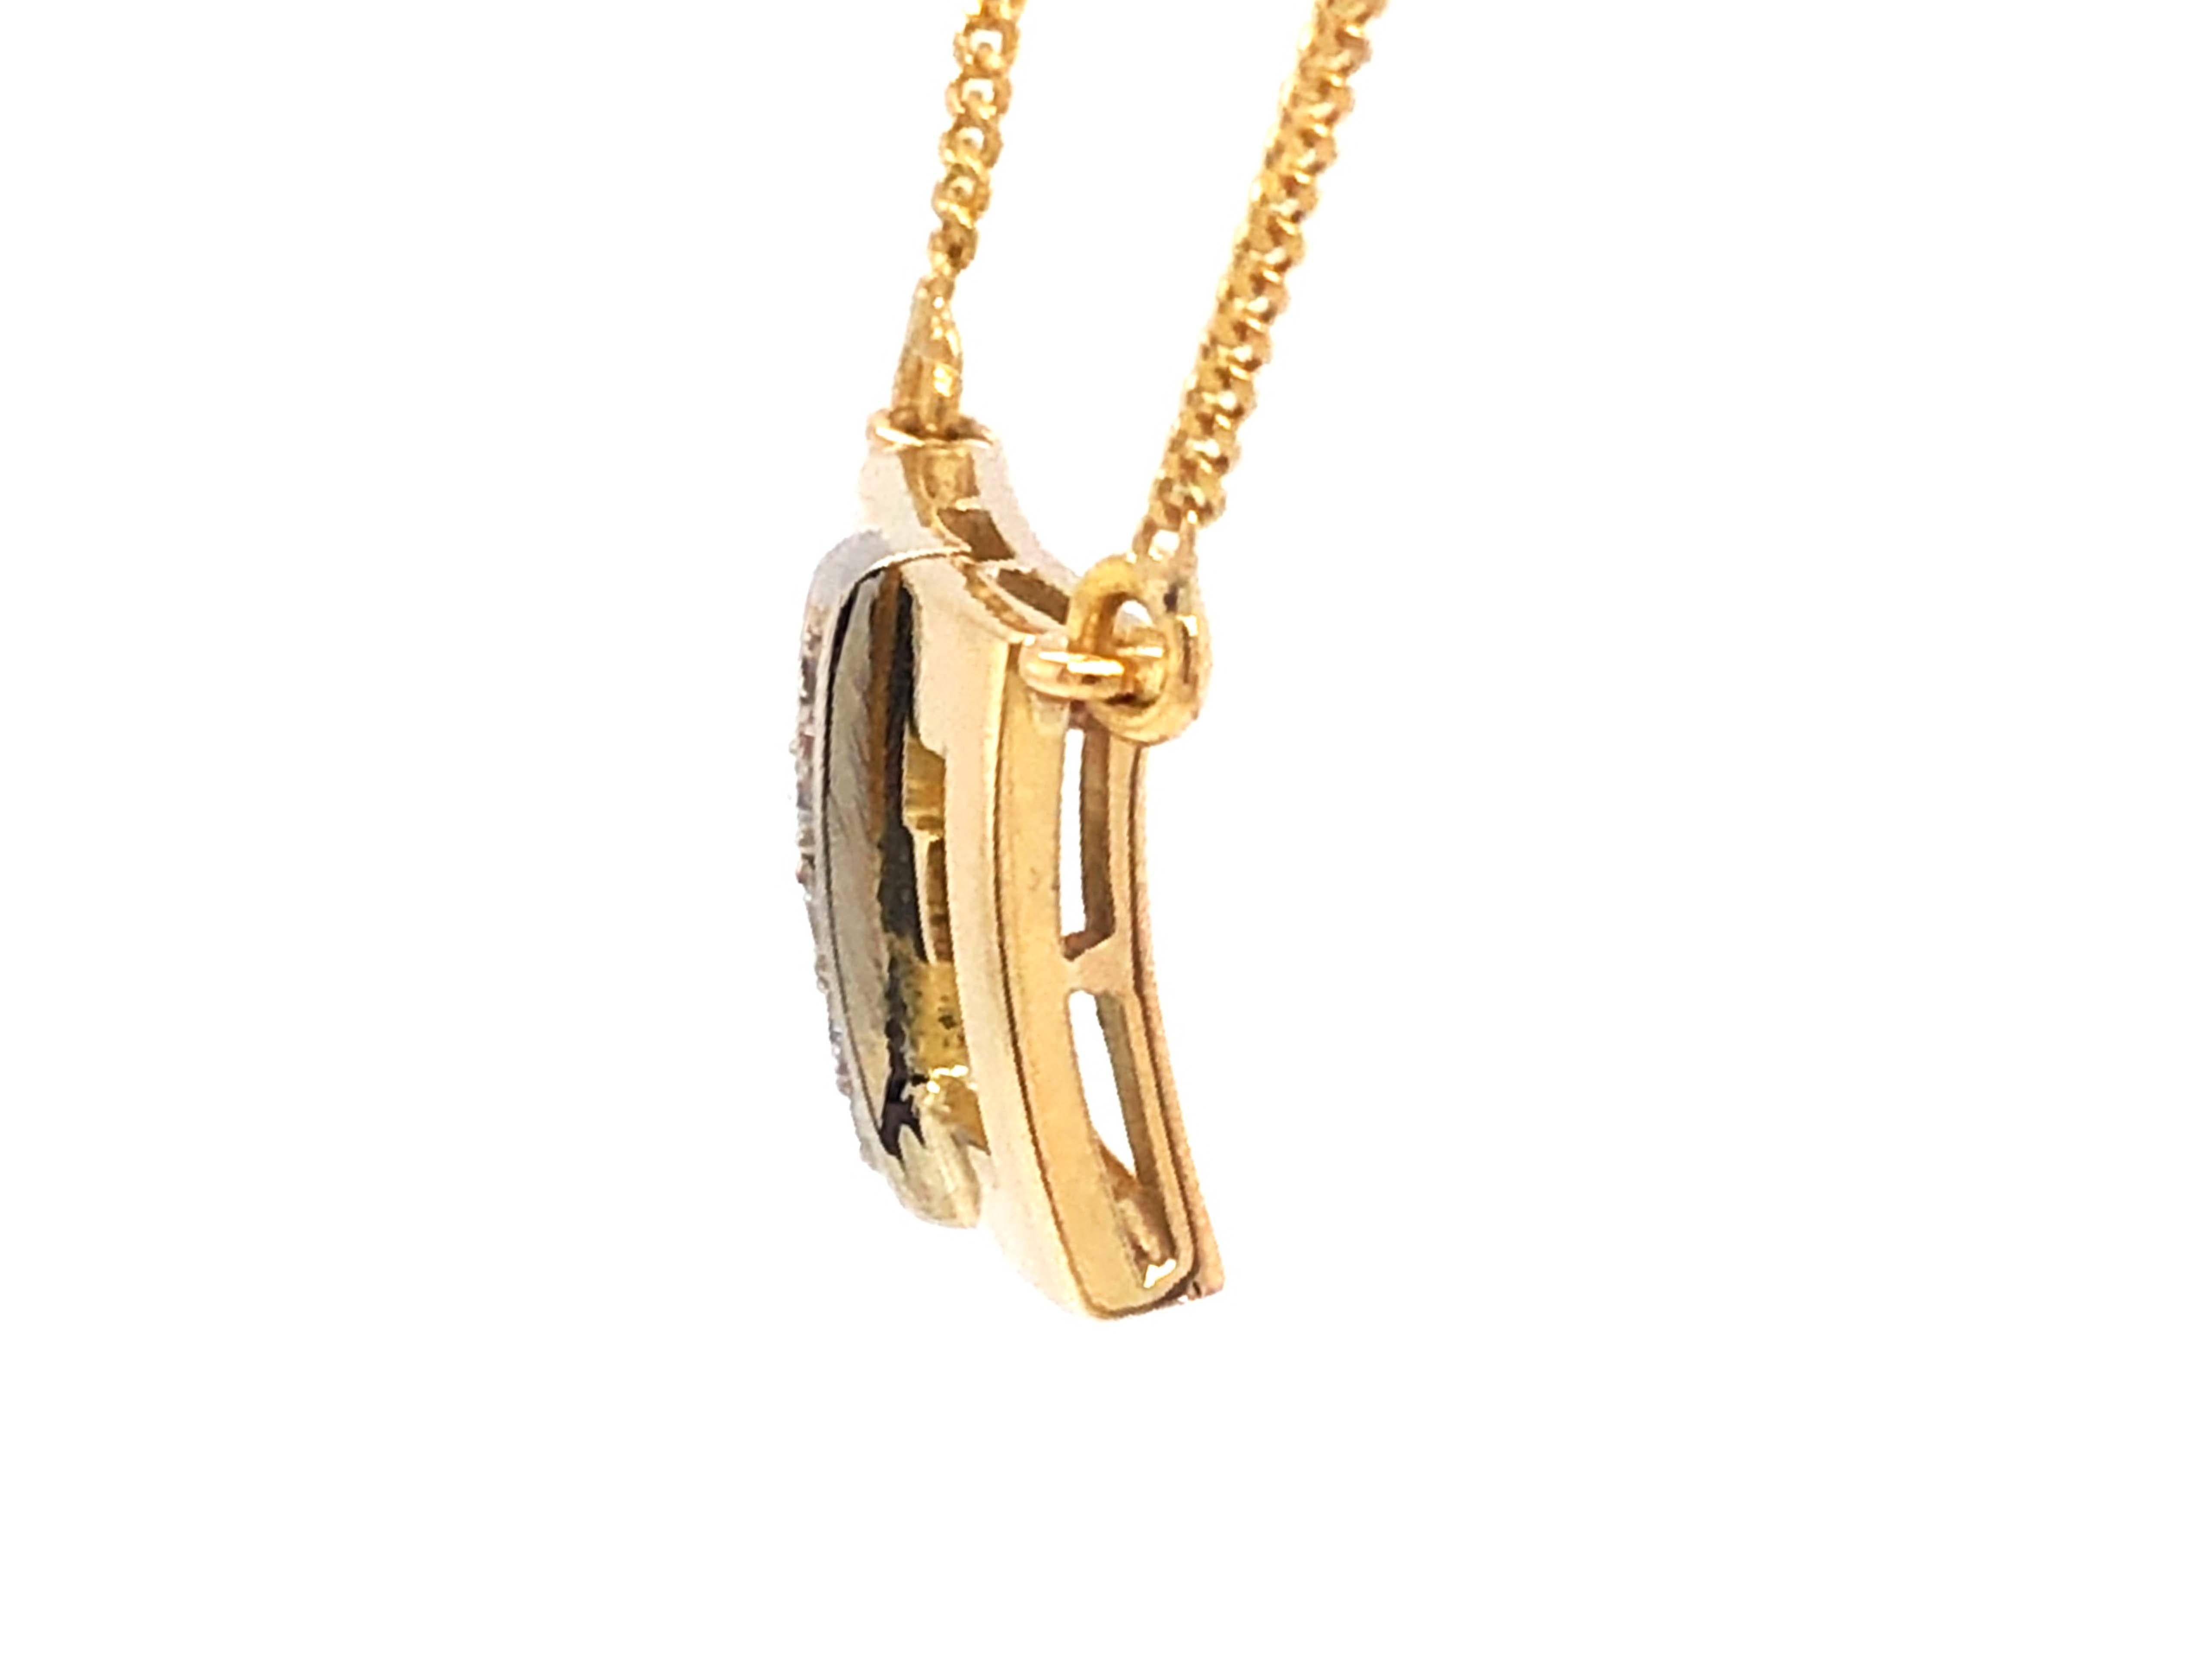 Women's or Men's Vintage Gucci Logo Gold and Diamond Pendant with Chain, 18k Yellow Gold